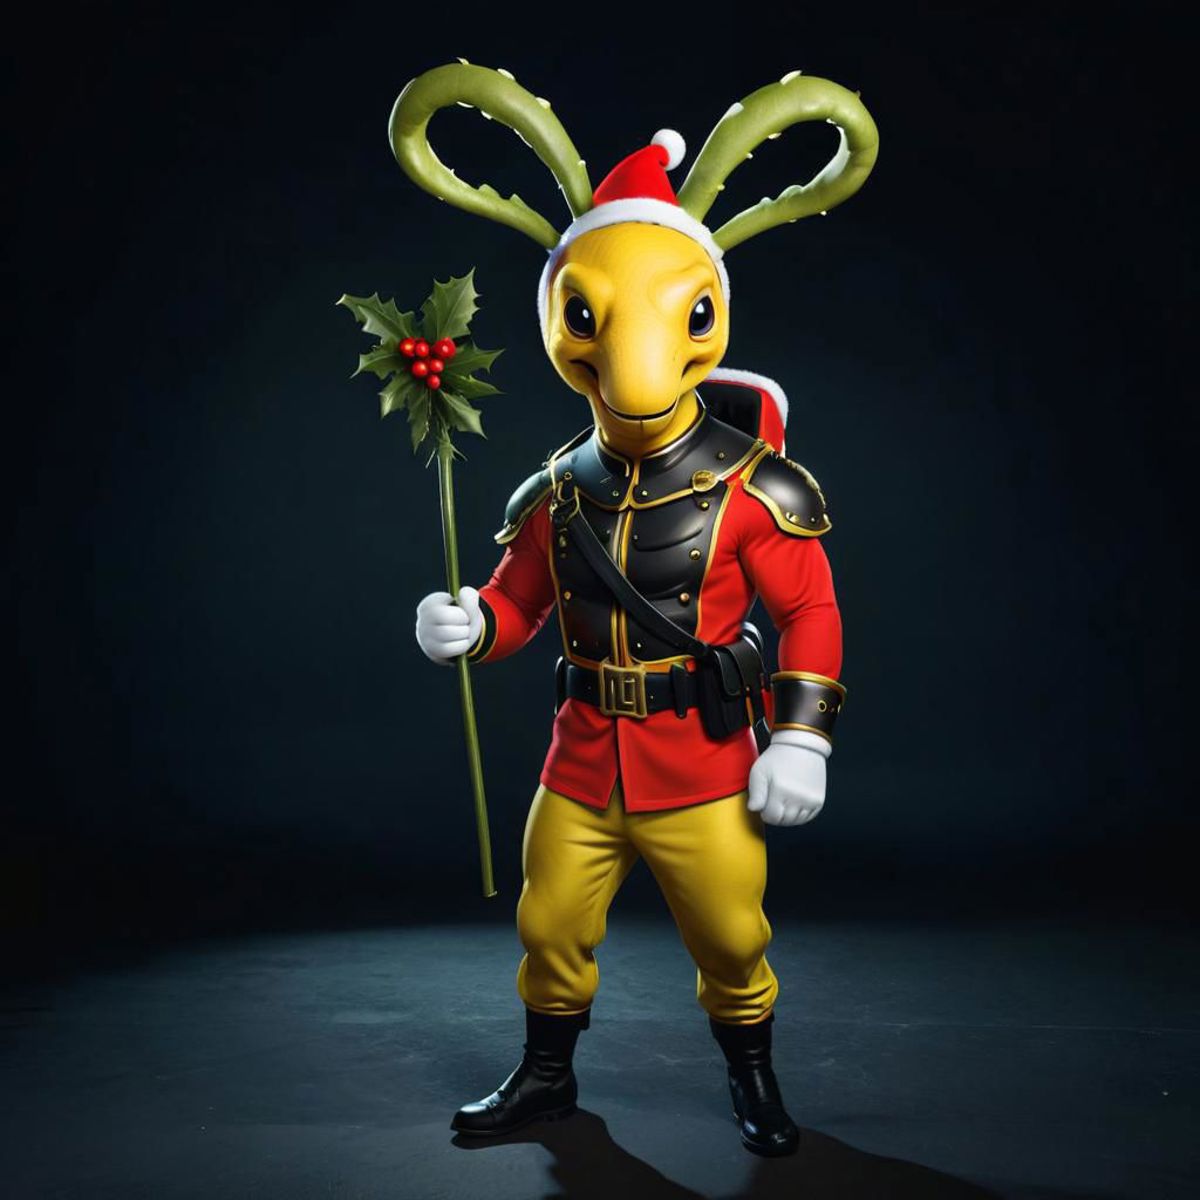 A yellow character with a Santa hat and a green gun is holding a green sprig.